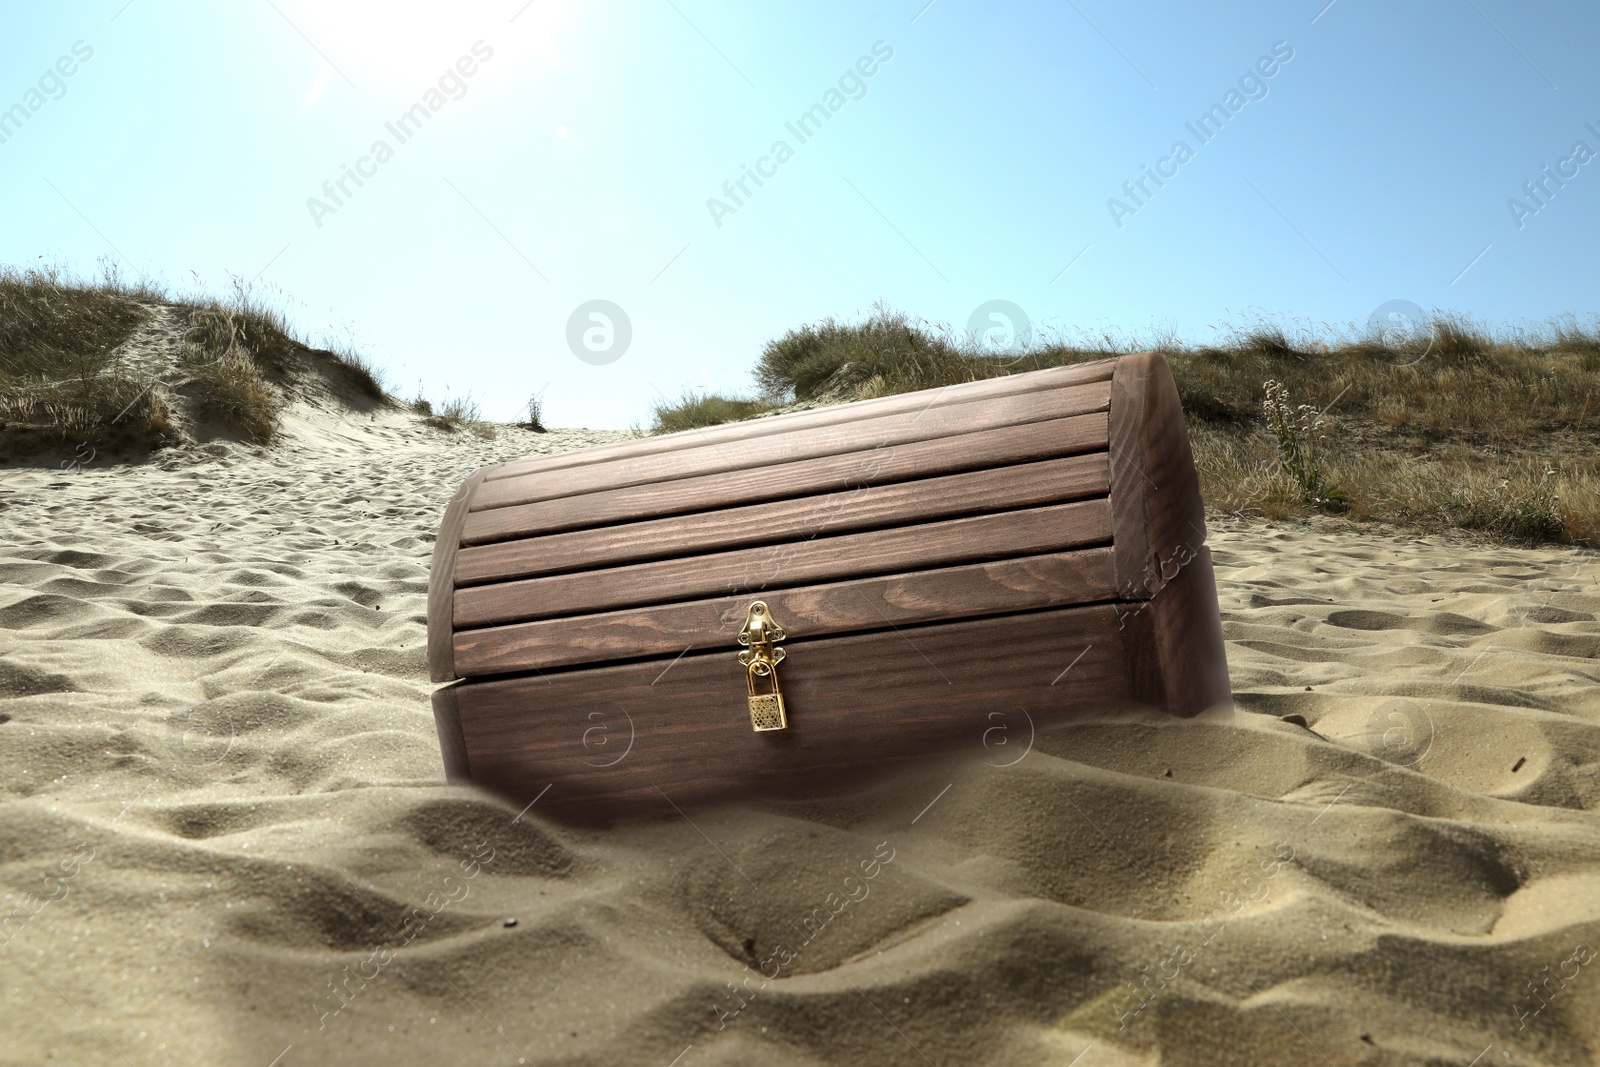 Image of Closed wooden treasure chest on sandy beach